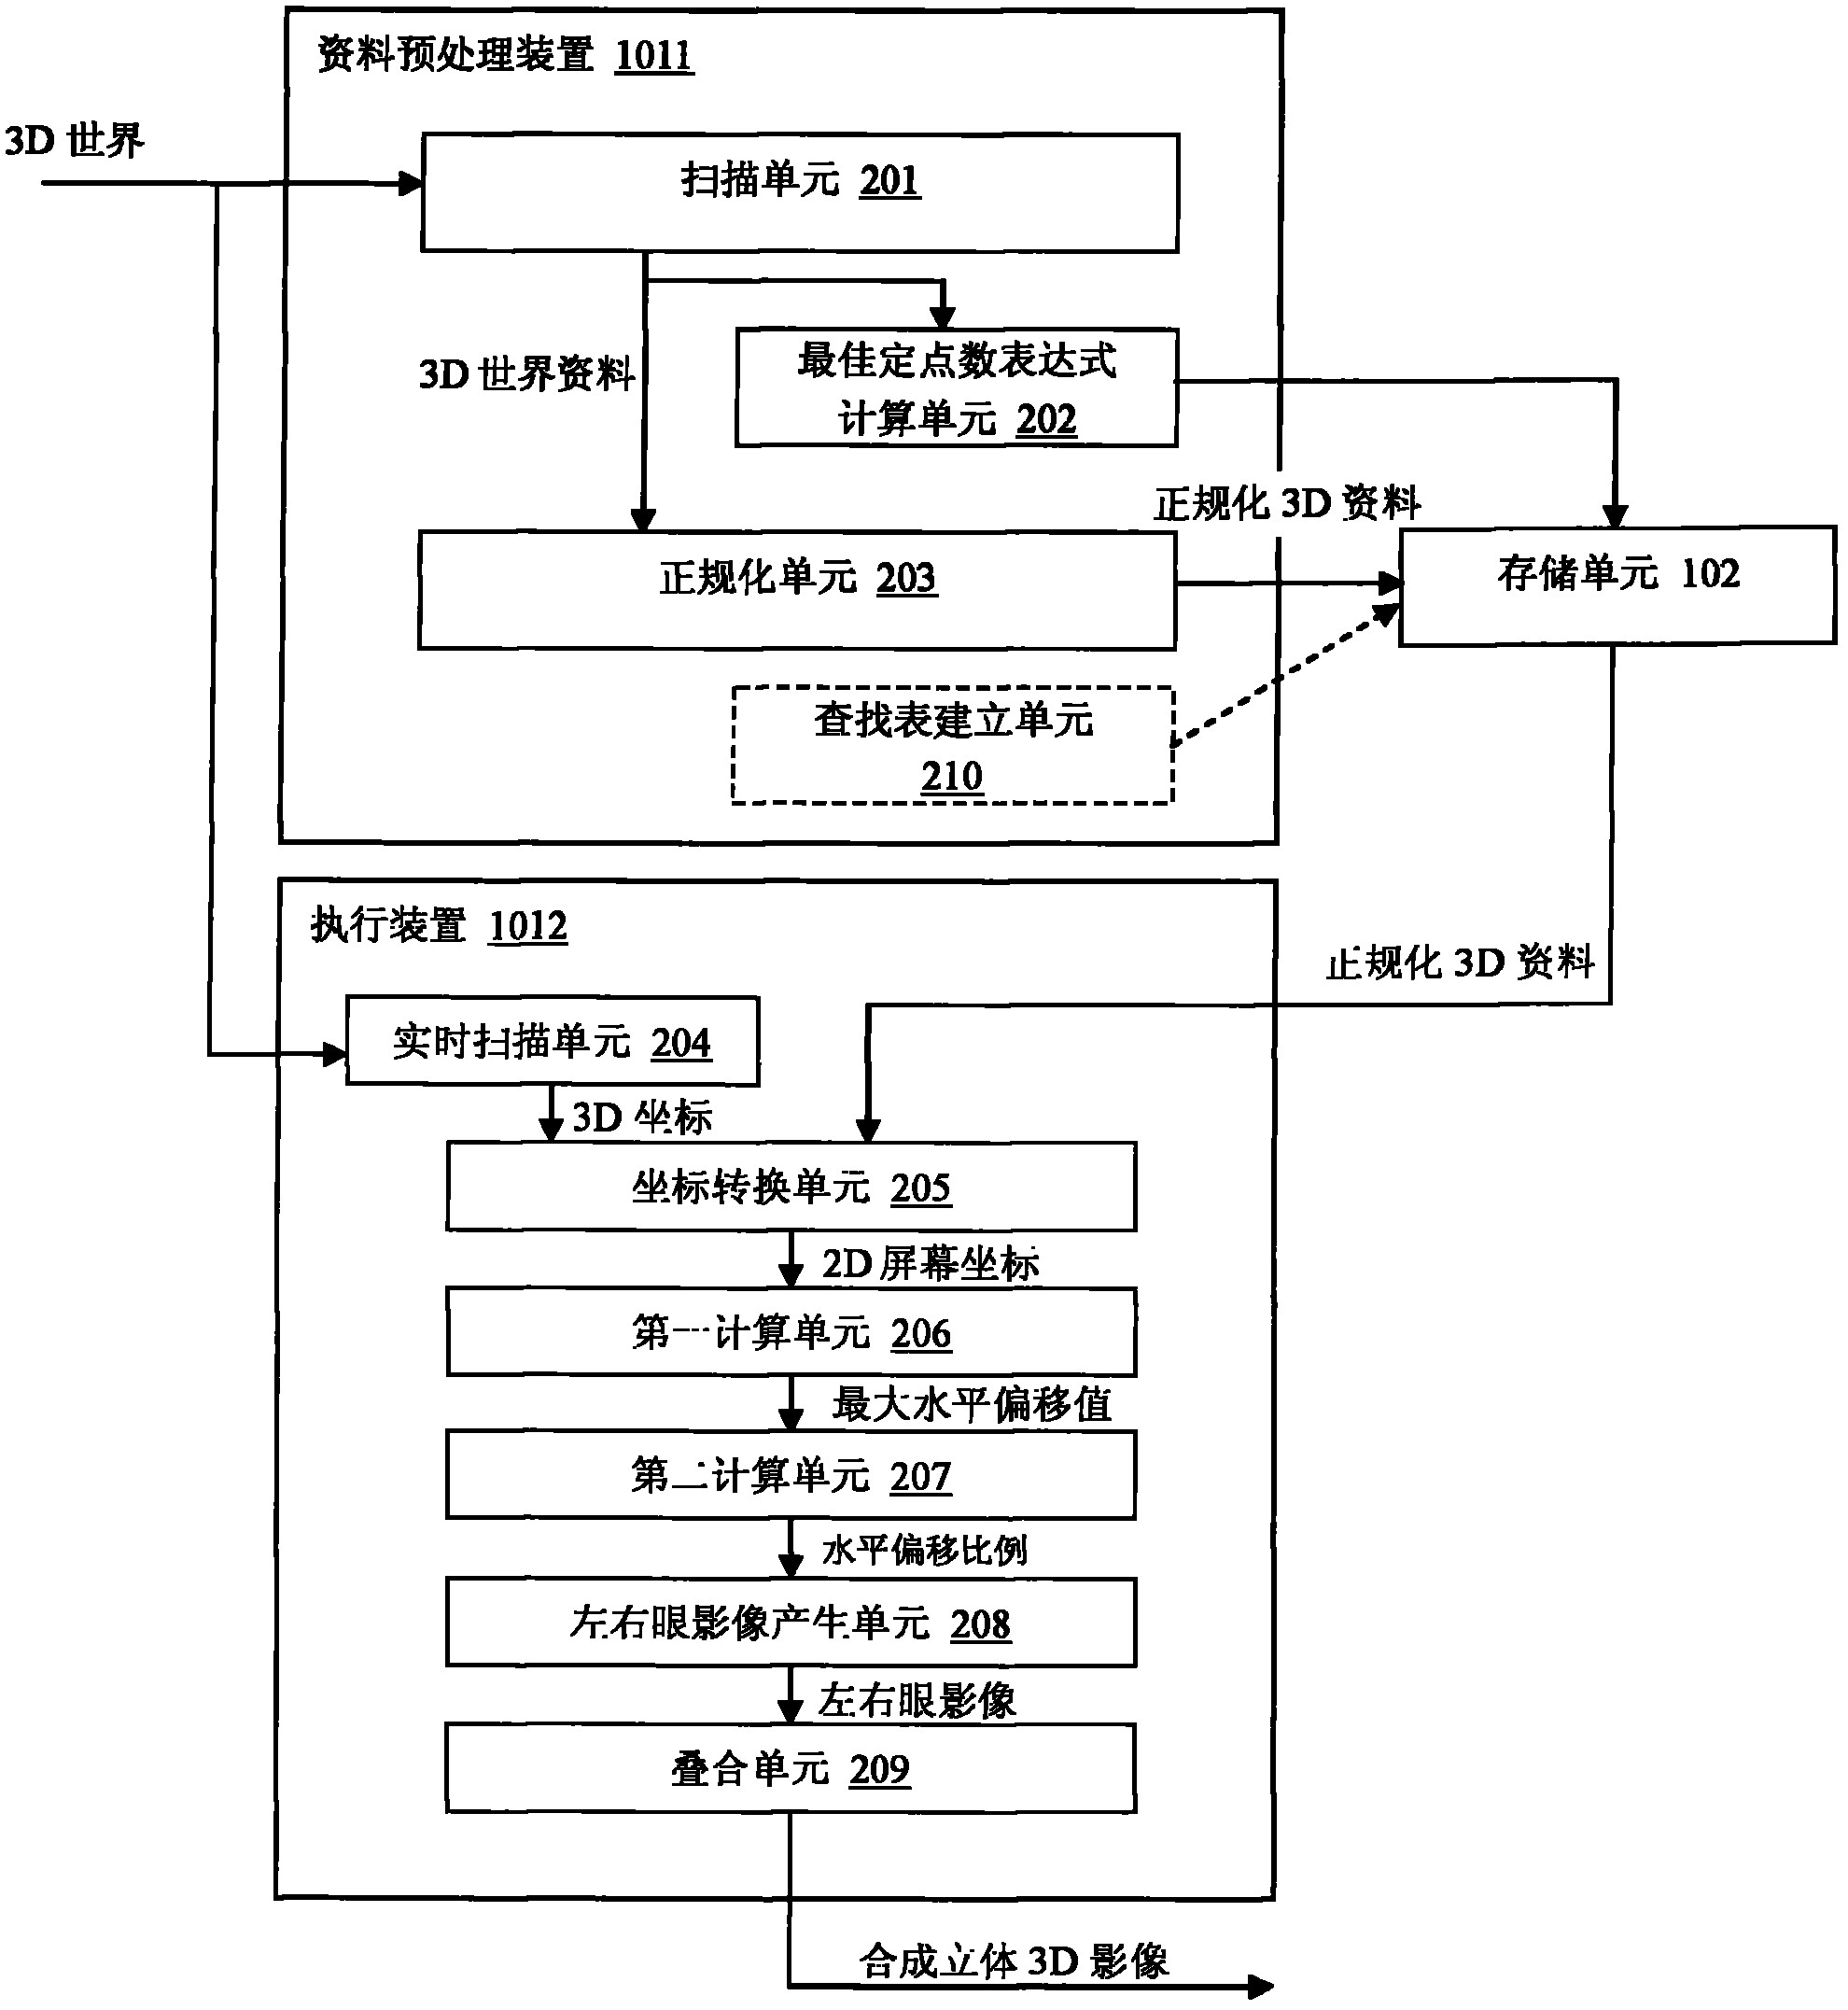 Method and equipment used for generating three-dimensional (3D) video on a resource-limited device